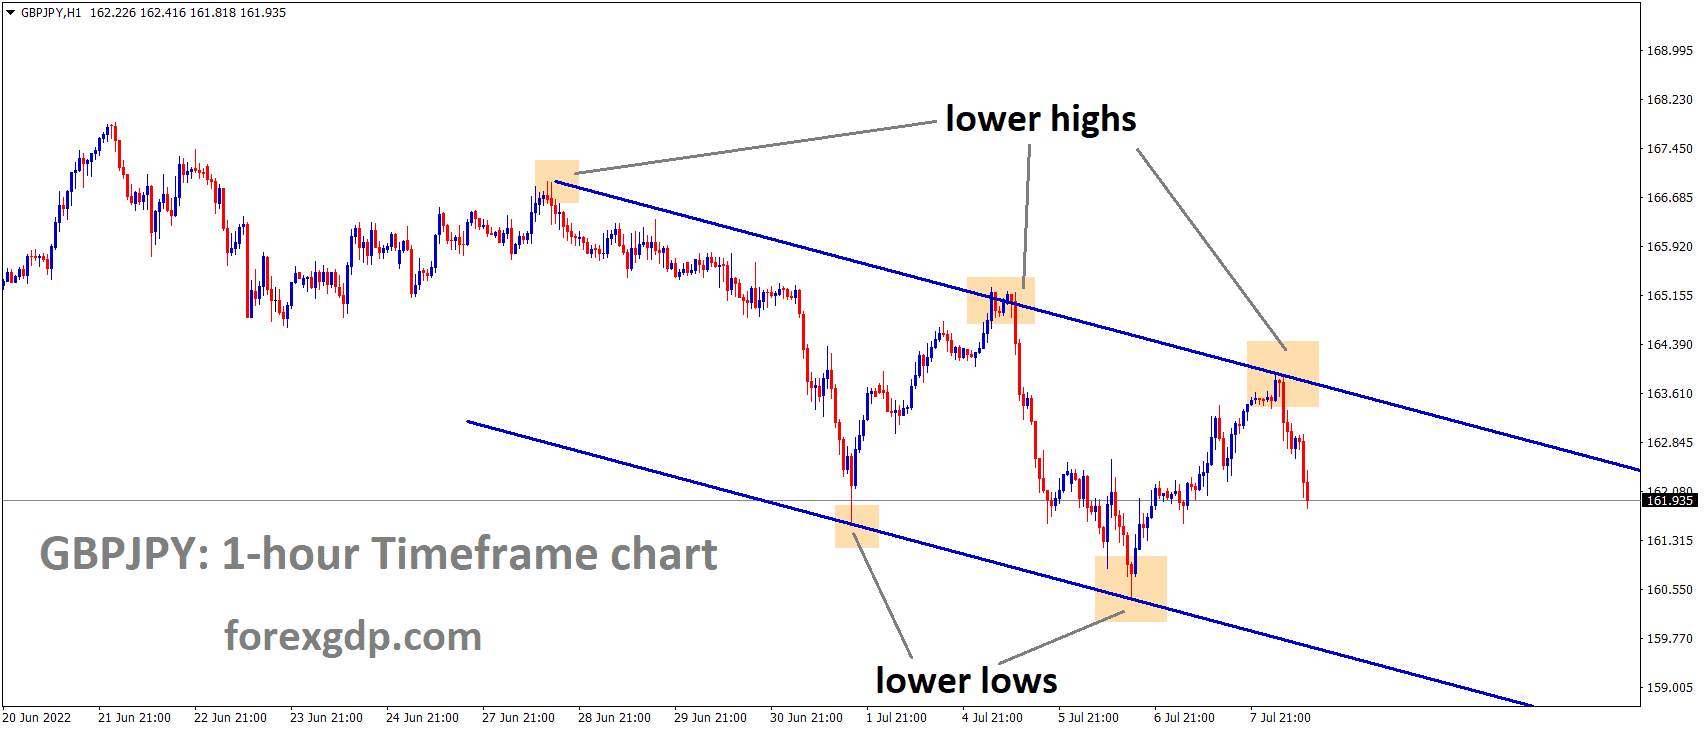 GBPJPY H1 Time Frame Analysis Market is moving in the Descending channel and the Market has Fallen from the lower high area of the channel.